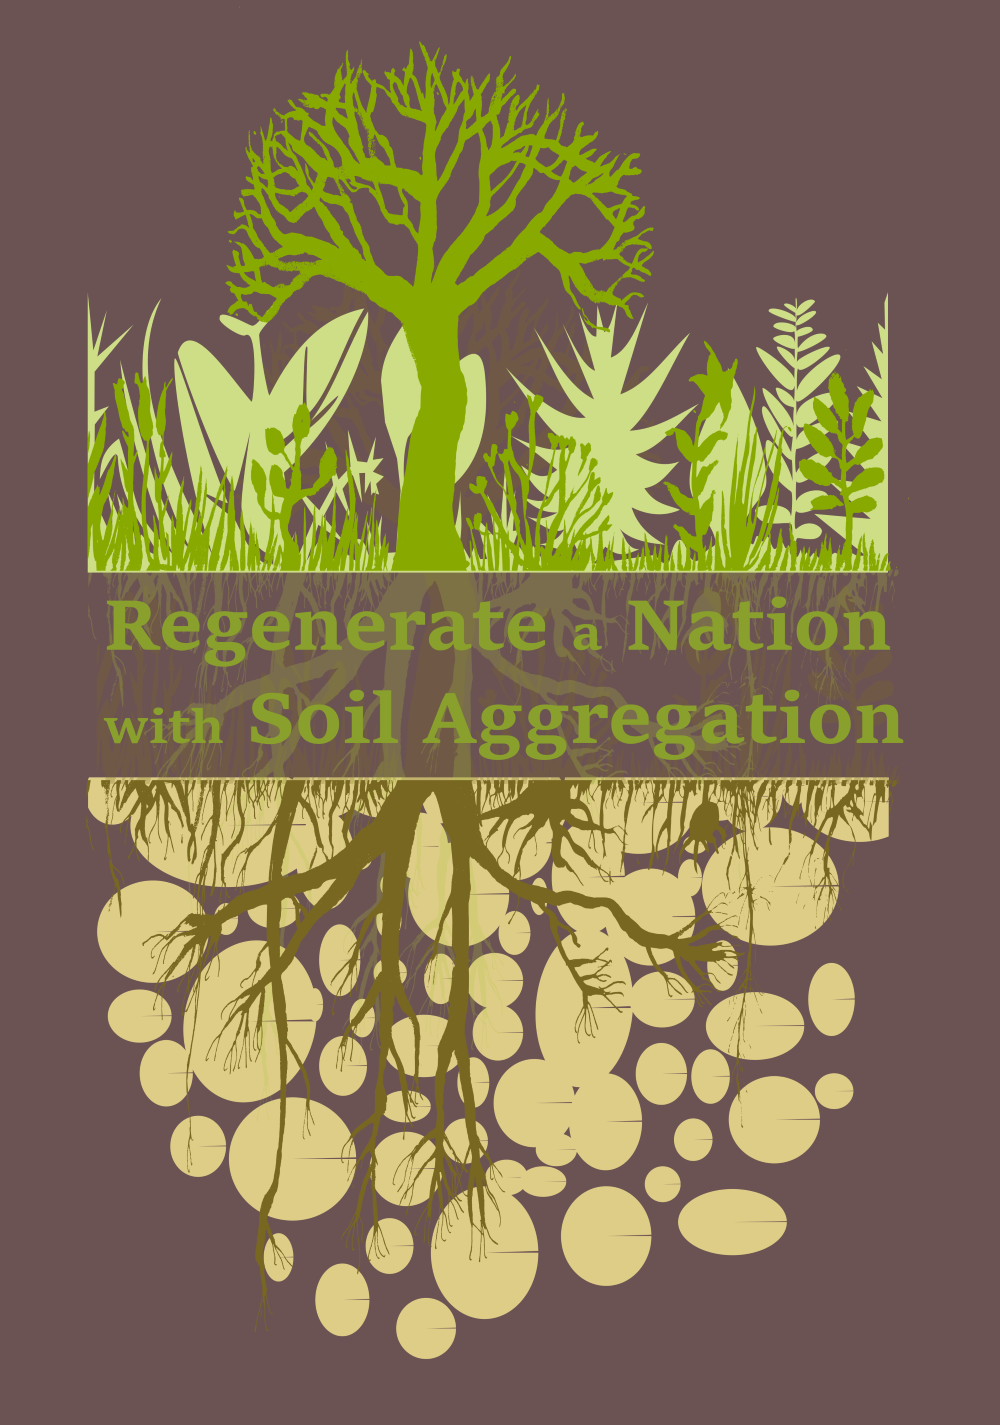 My soil health design printed on clothing, decor items and accessories.